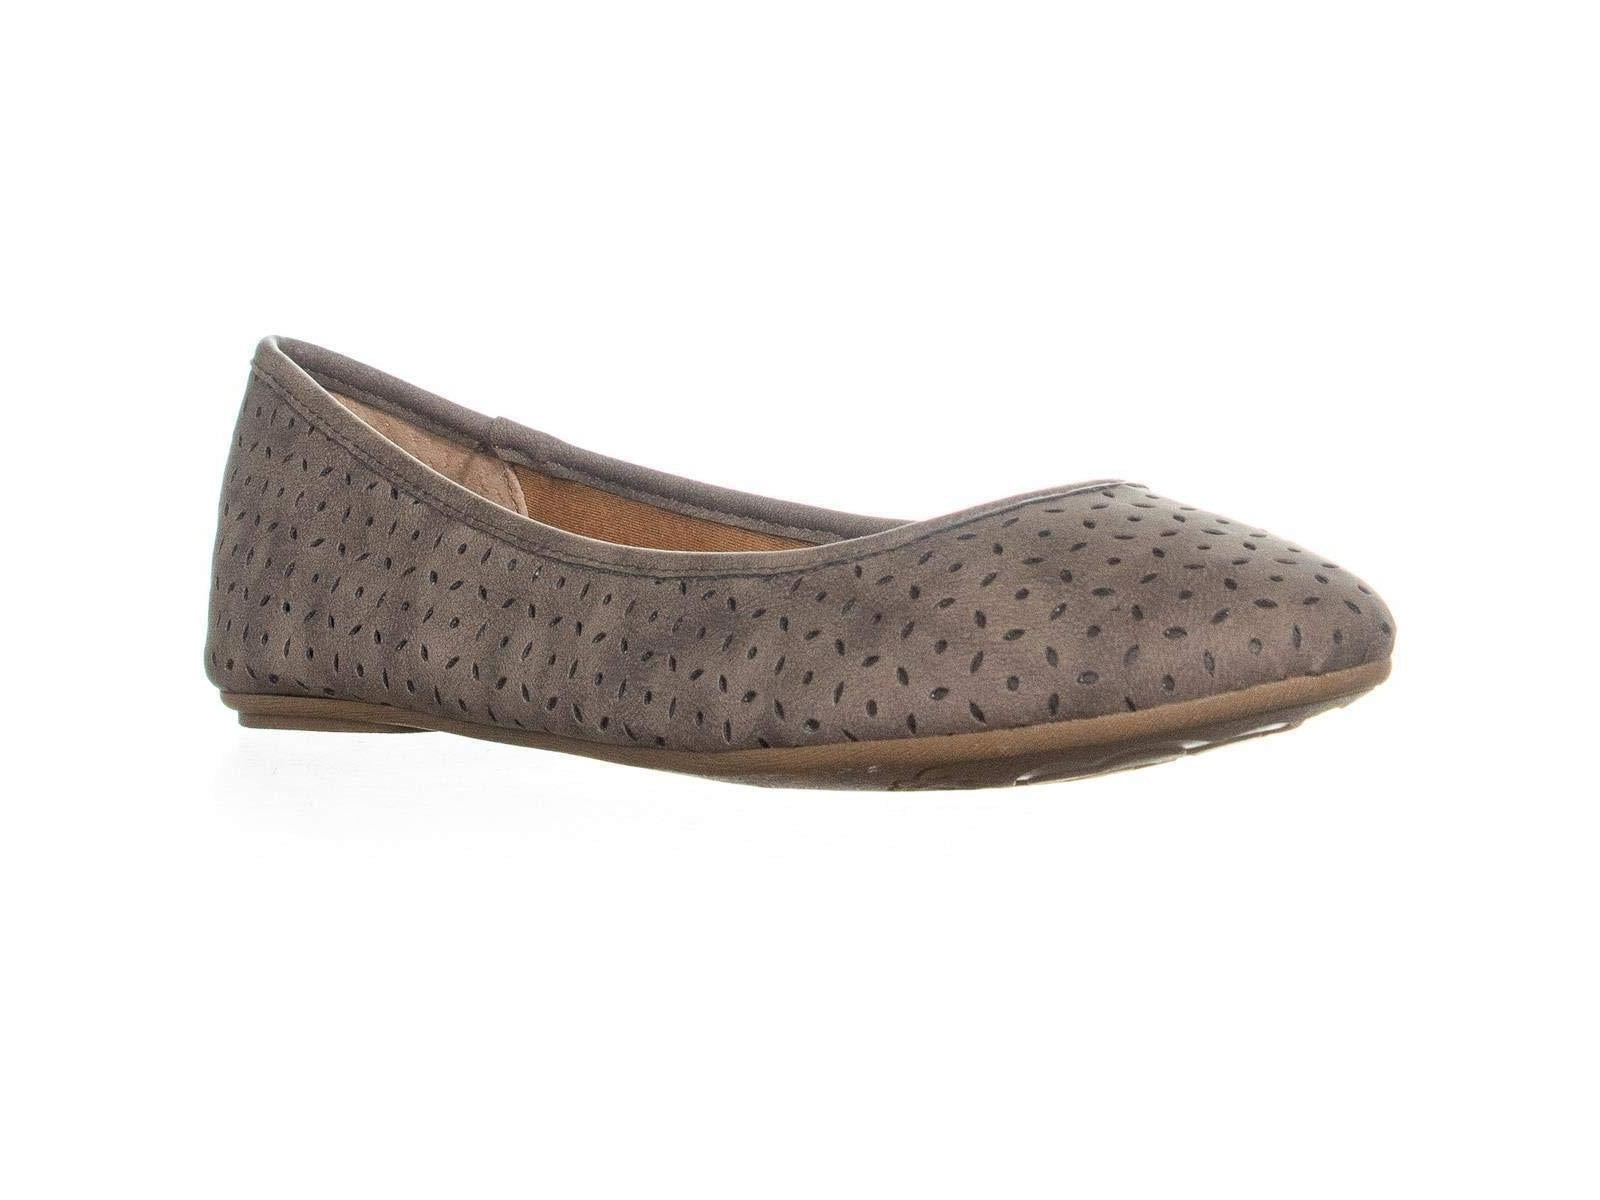 American Rag Womens Connie Closed Toe Ballet Flats, Taupe, Size 6.5 ...